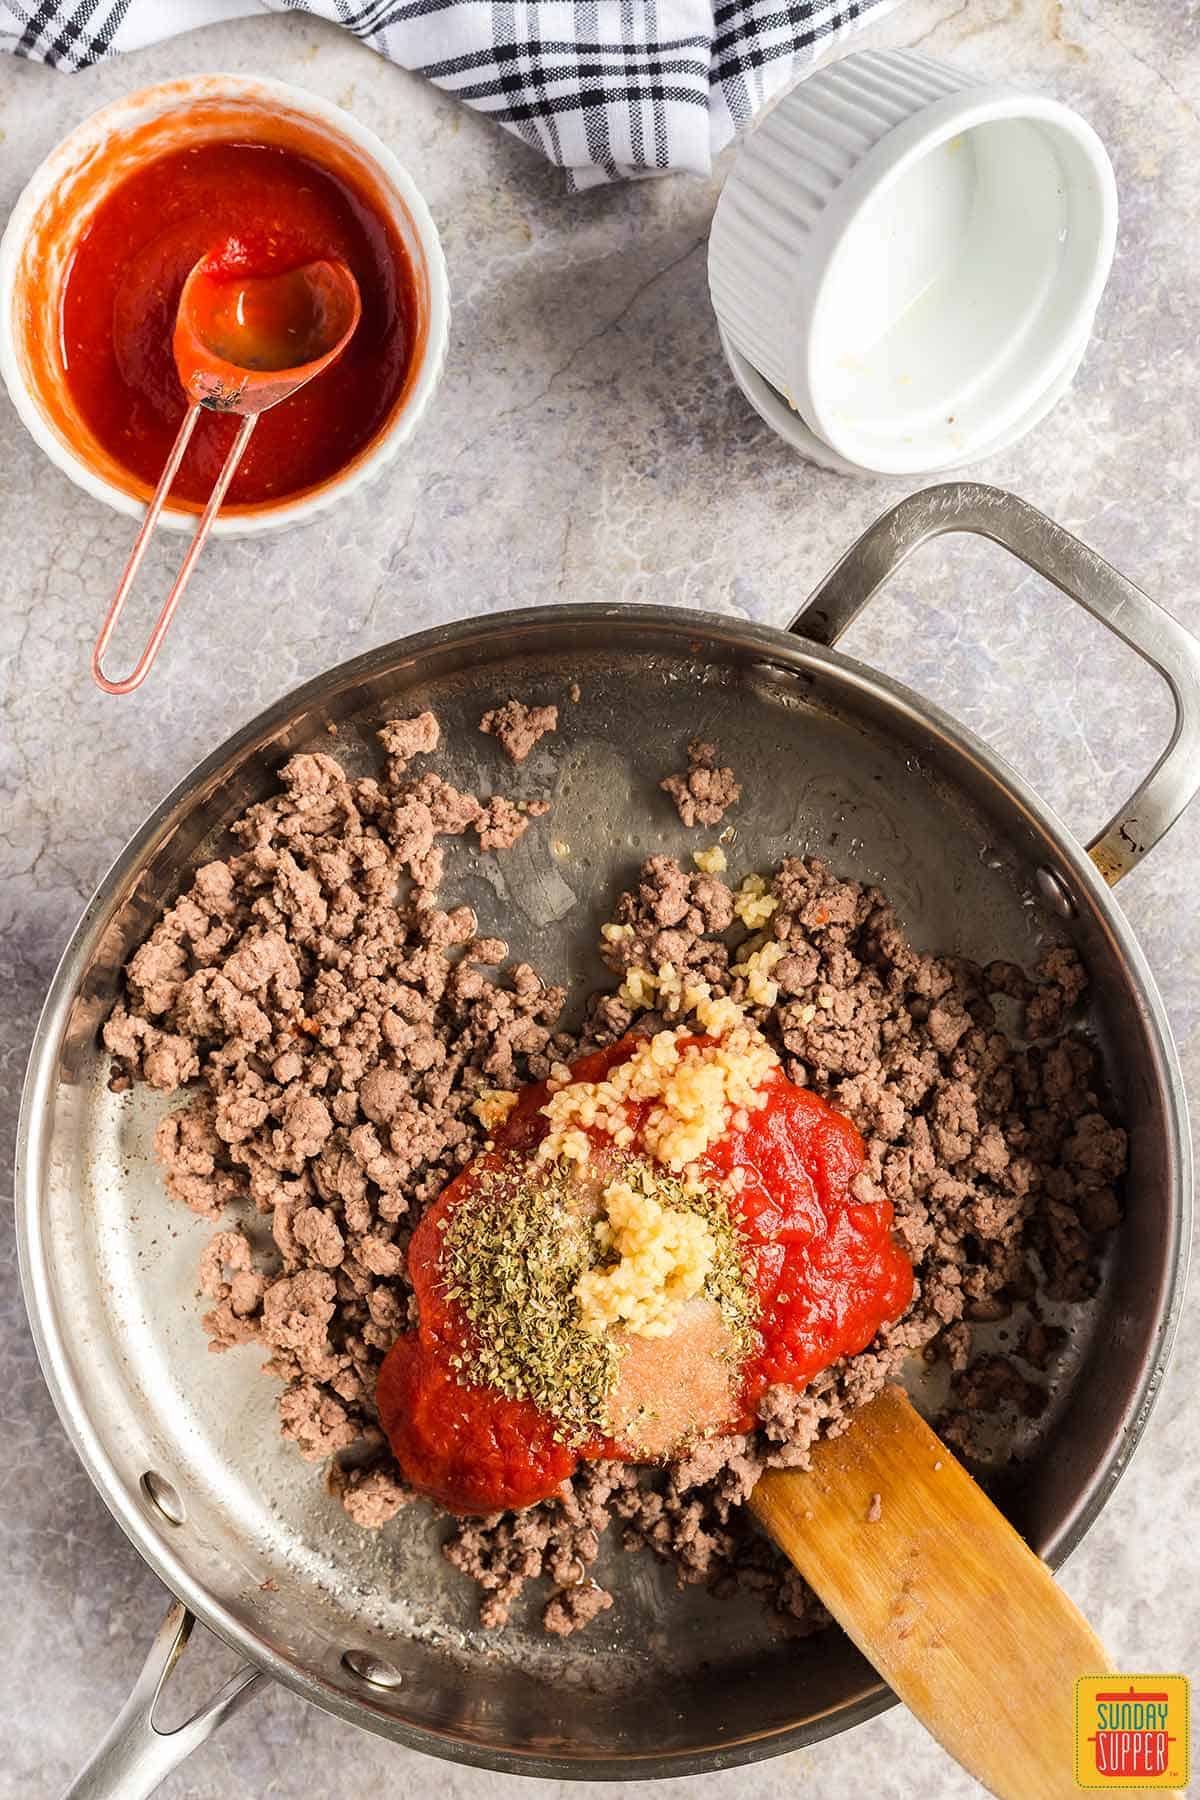 Adding tomato sauce and seasoning to ground beef in a skillet